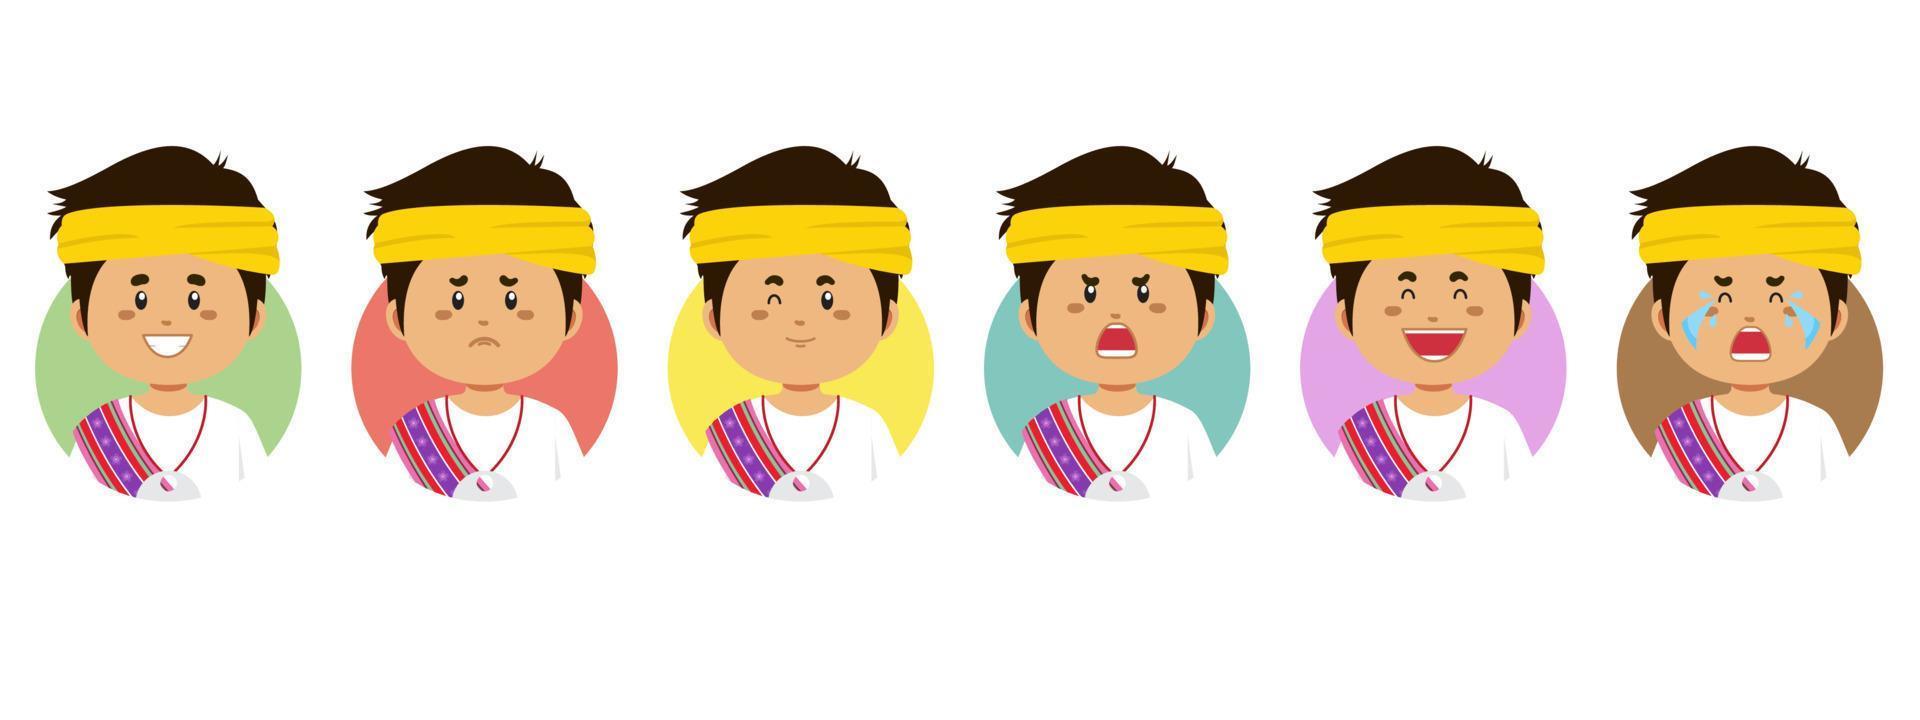 Timur Leste Avatar with Various Expression vector